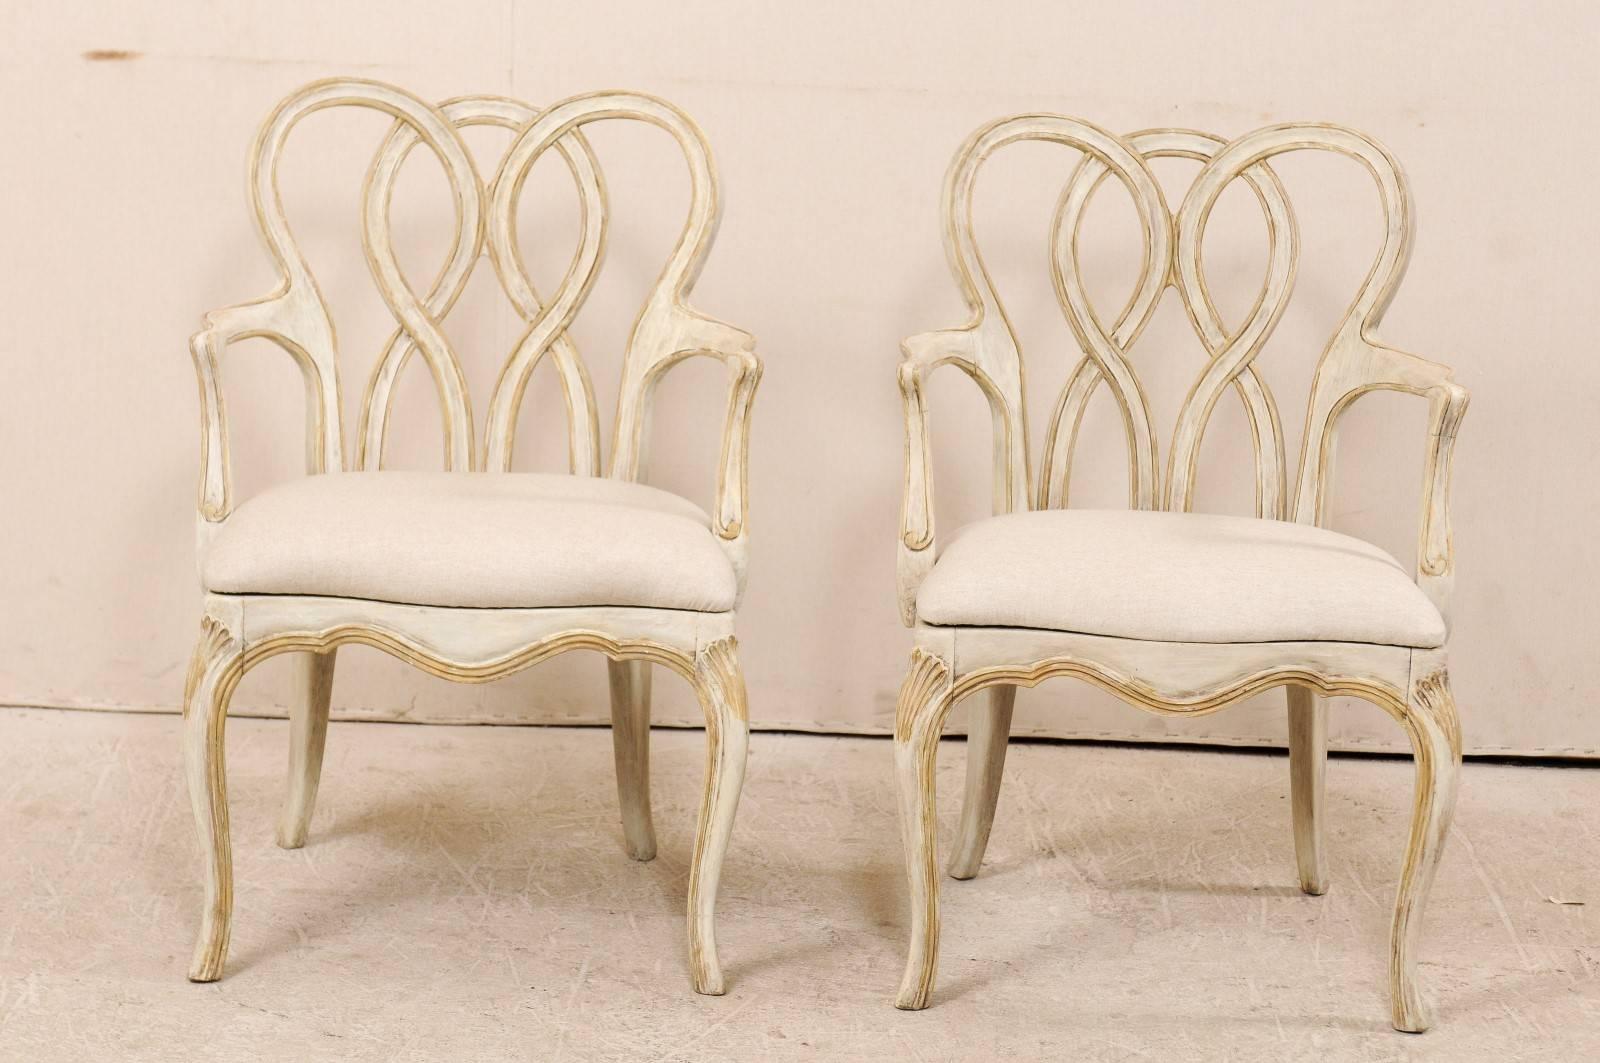 20th Century Pair of Venetian Style Painted Wood Armchairs with Intertwined Back-Splats